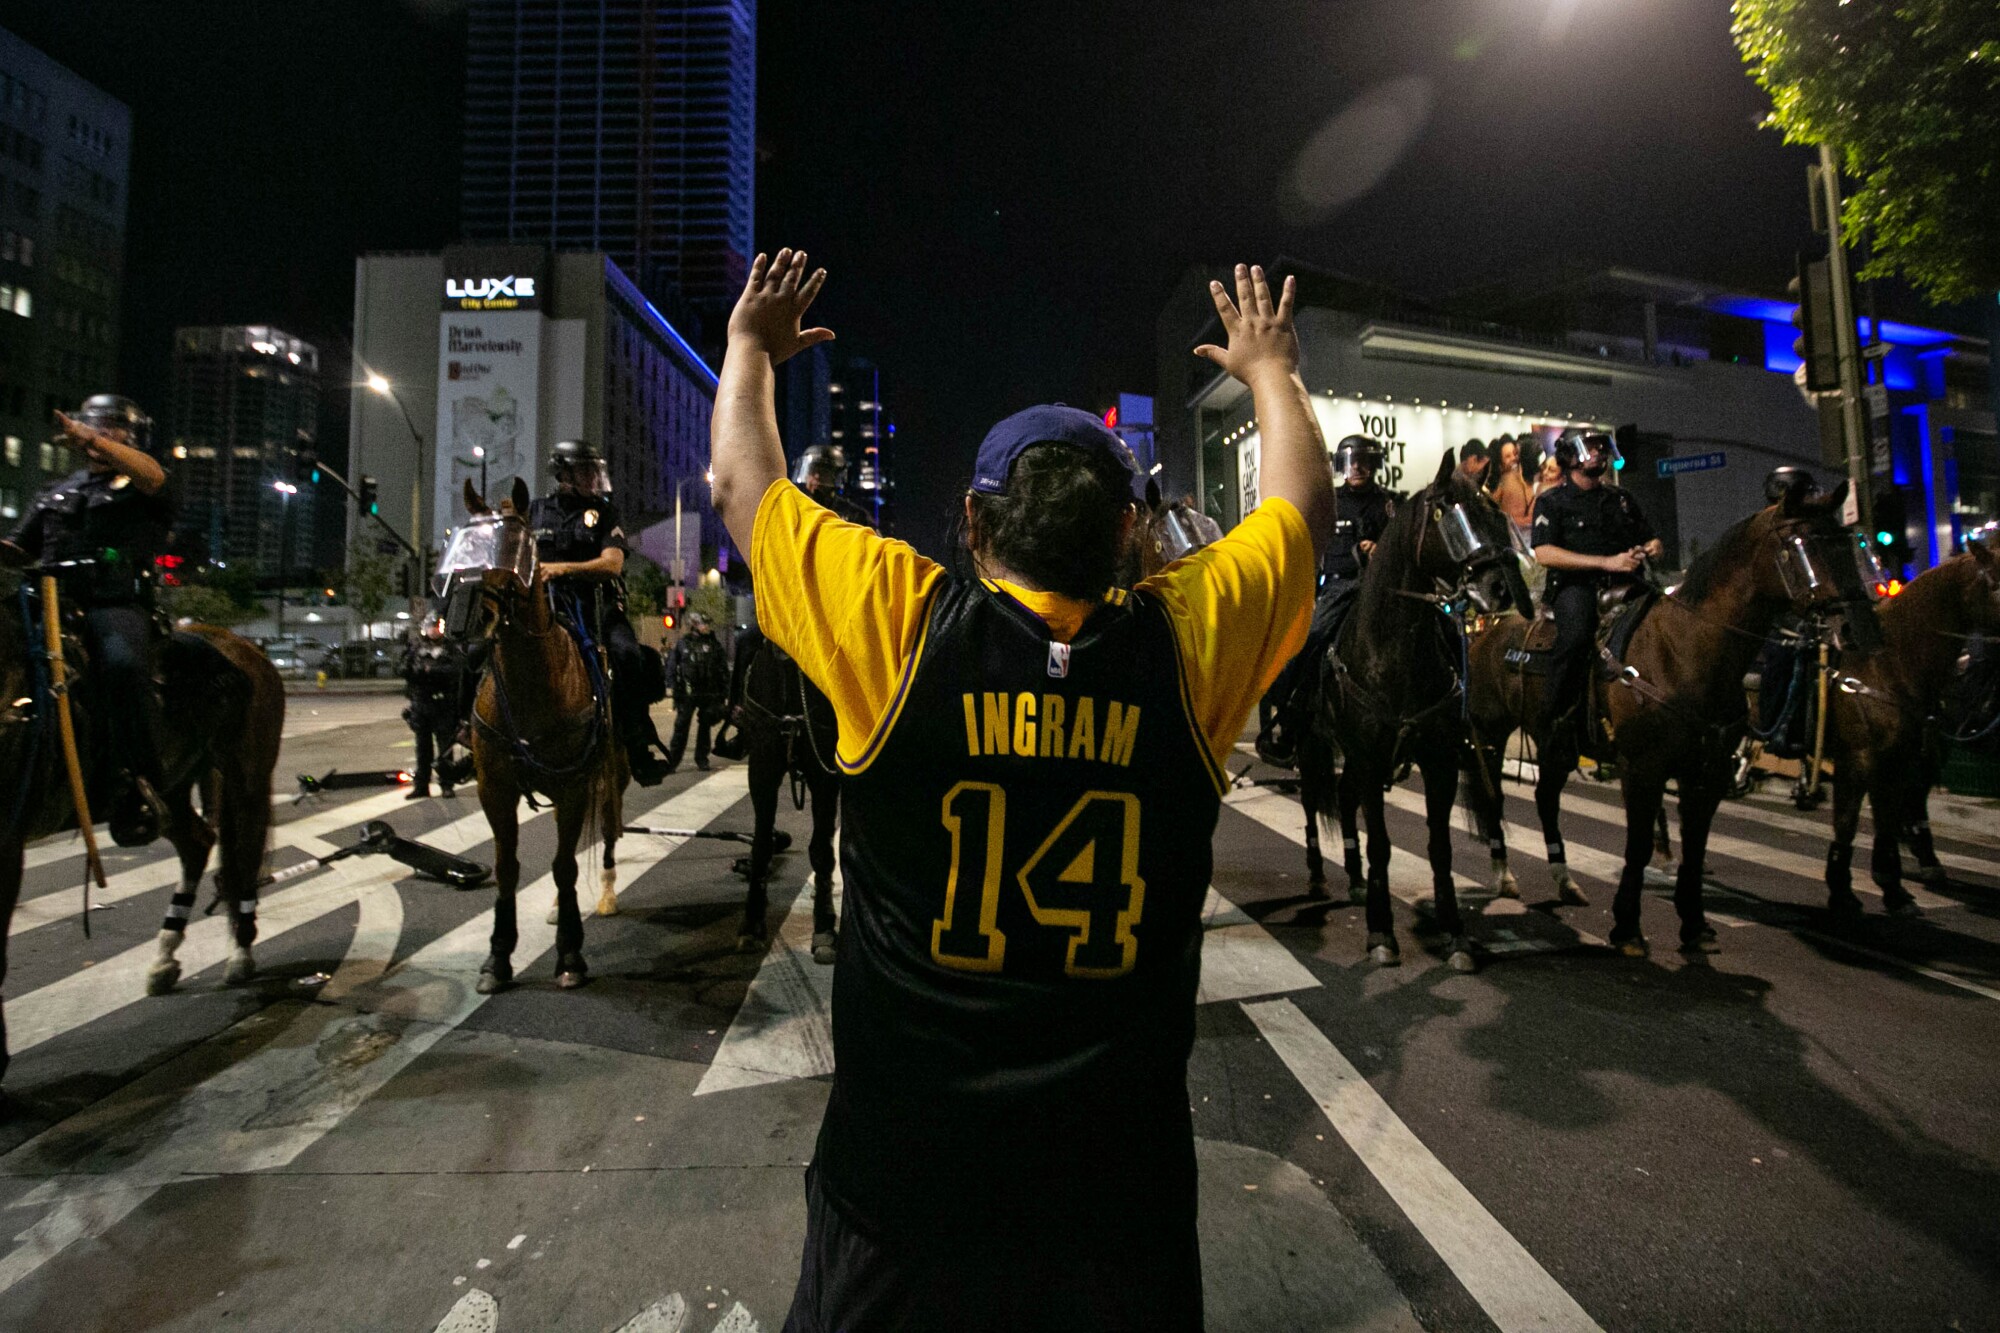 LAPD officers on horses clear the area near L.A. Live, declaring an unlawful assembly.